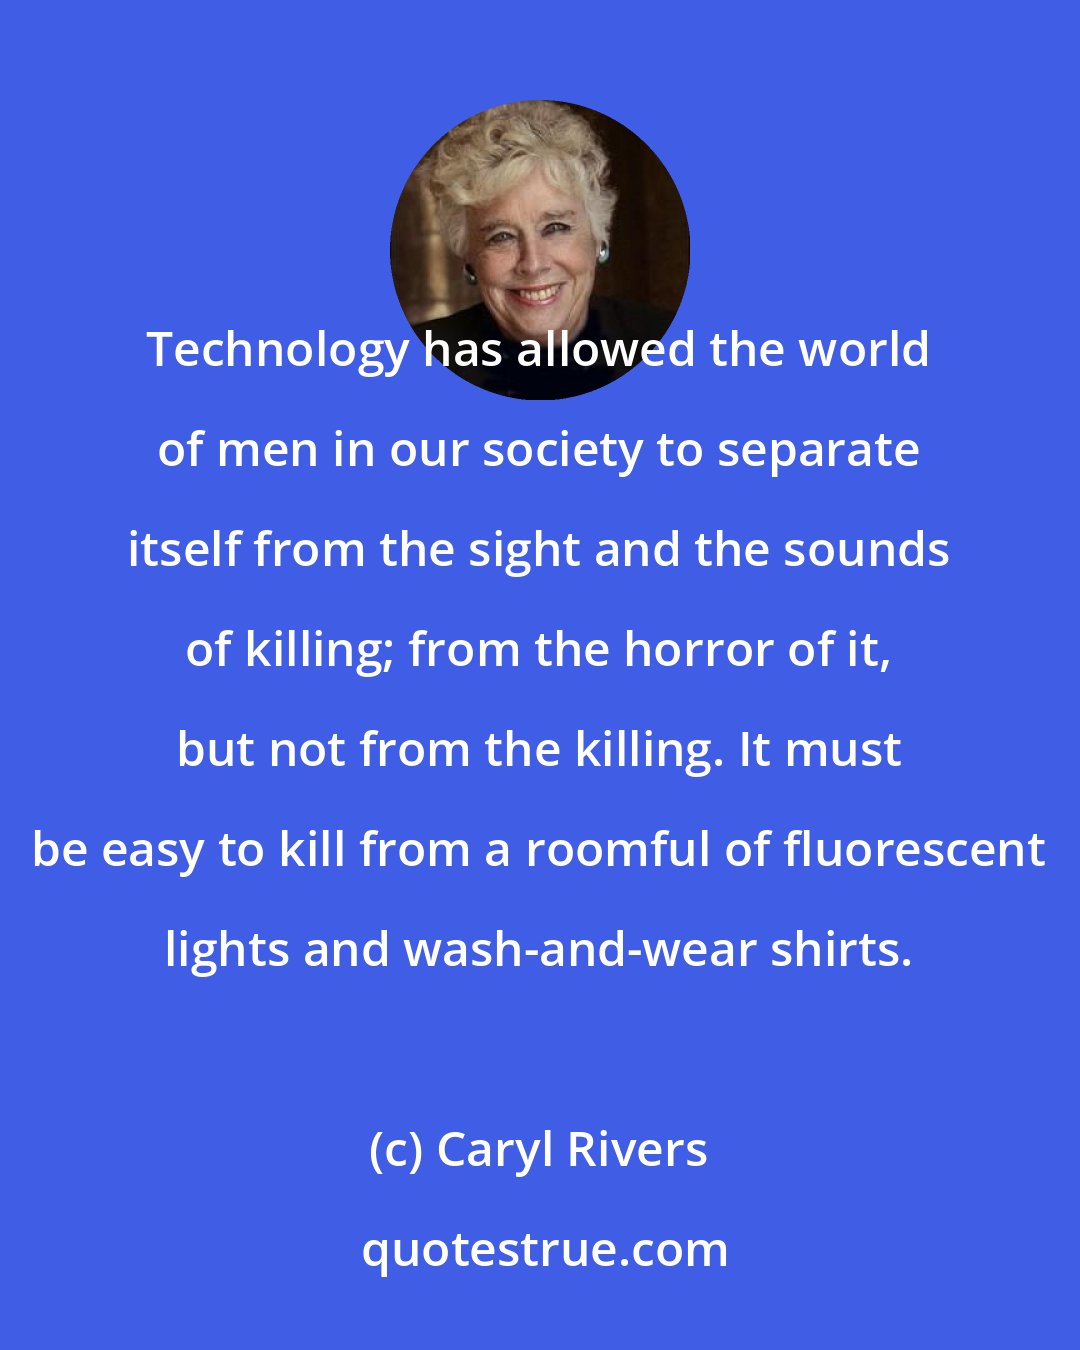 Caryl Rivers: Technology has allowed the world of men in our society to separate itself from the sight and the sounds of killing; from the horror of it, but not from the killing. It must be easy to kill from a roomful of fluorescent lights and wash-and-wear shirts.